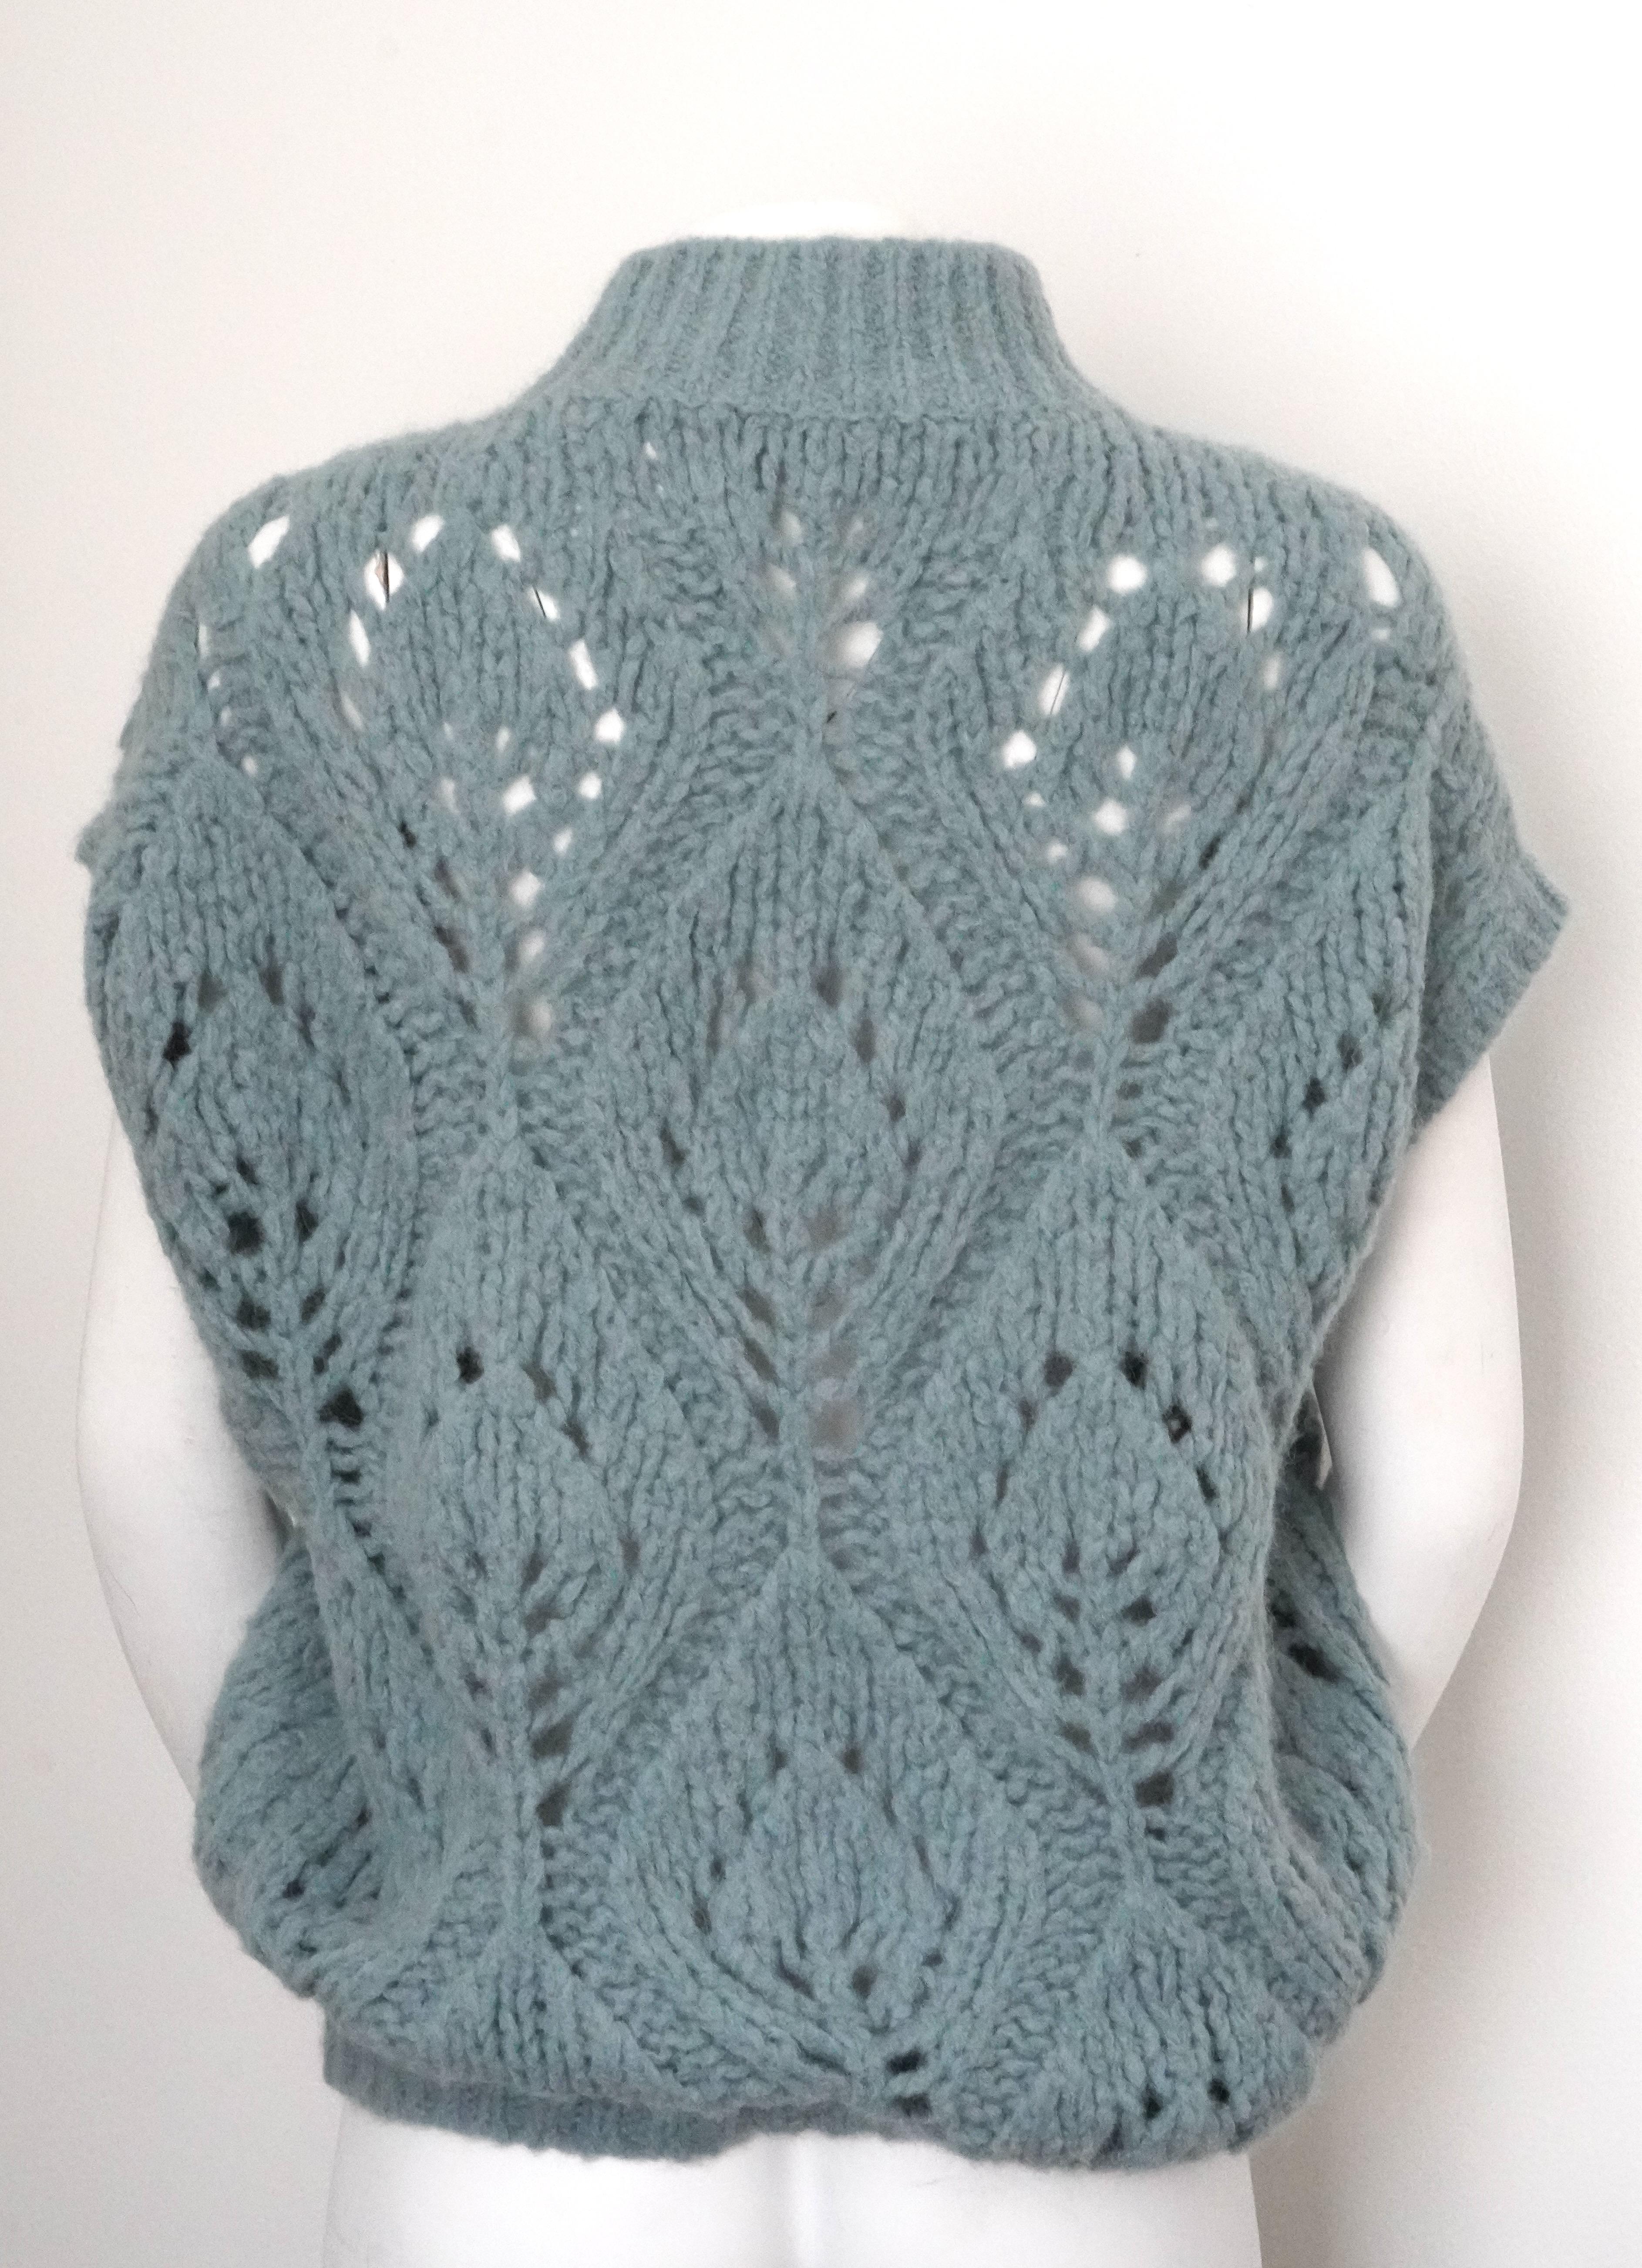 Pastel blue alpaca wool-blend short-sleeved jumper from BRUNELLO CUCINELLI featuring knitted openwork construction, ribbed detailing, high neck and short sleeves.
Length: 27 inches
Bust: 52 inches
Missing the size tag 